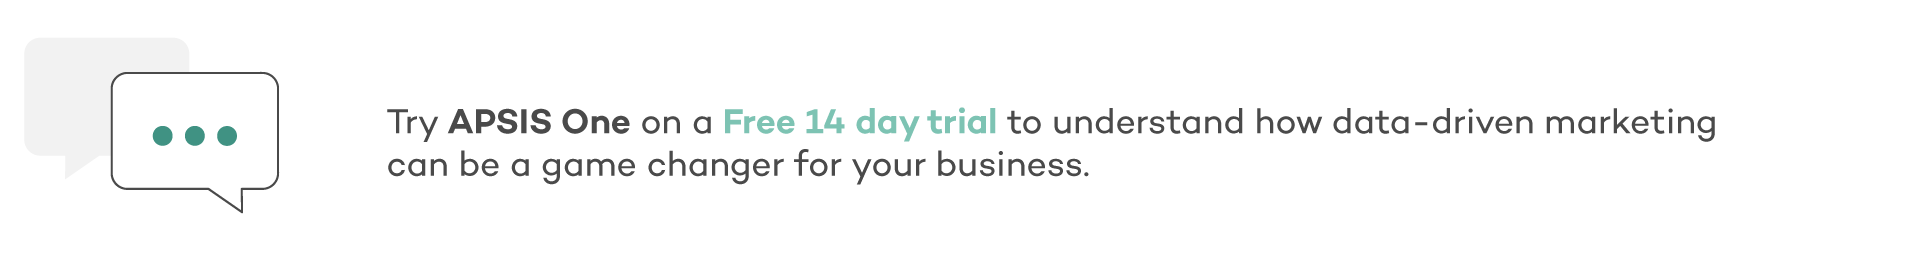 Try APSIS One, get a free 14 day trial.